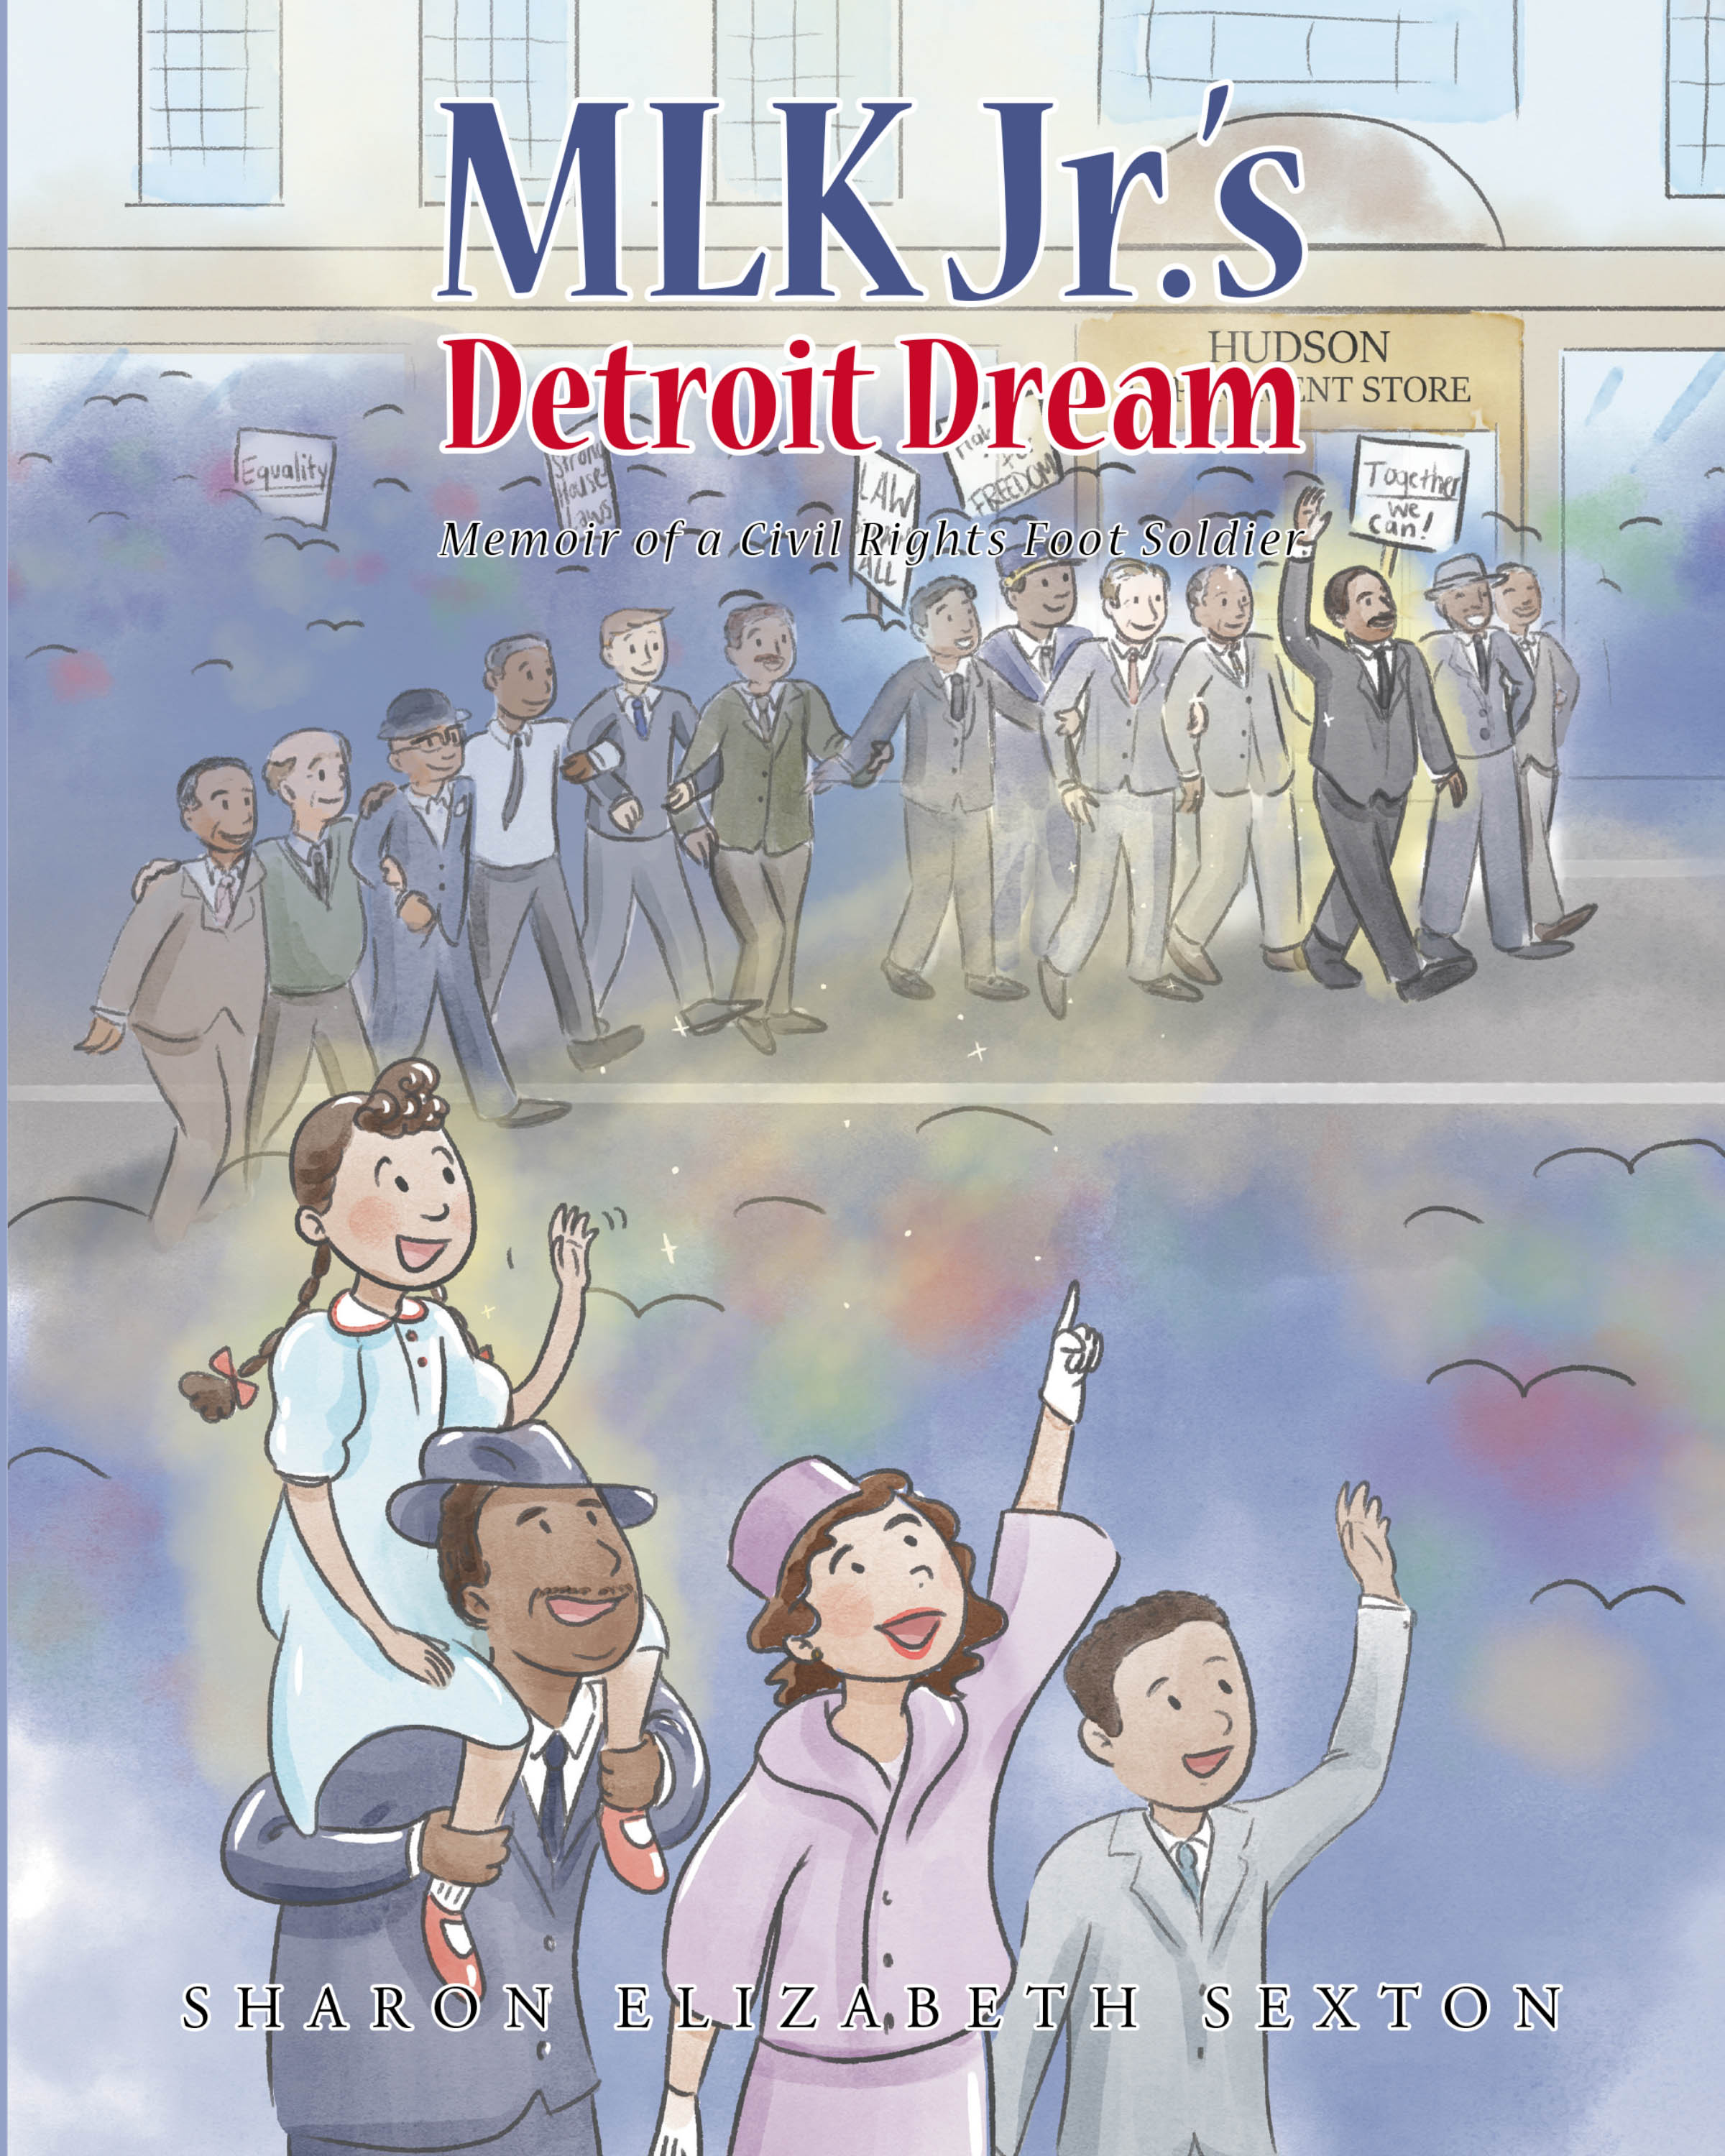 Author Sharon Elizabeth Sexton’s New Book, “MLK Jr.’s Detroit Dream Memoir of a Civil Rights Foot Soldier,” Encourages Generations to Talk About African American History